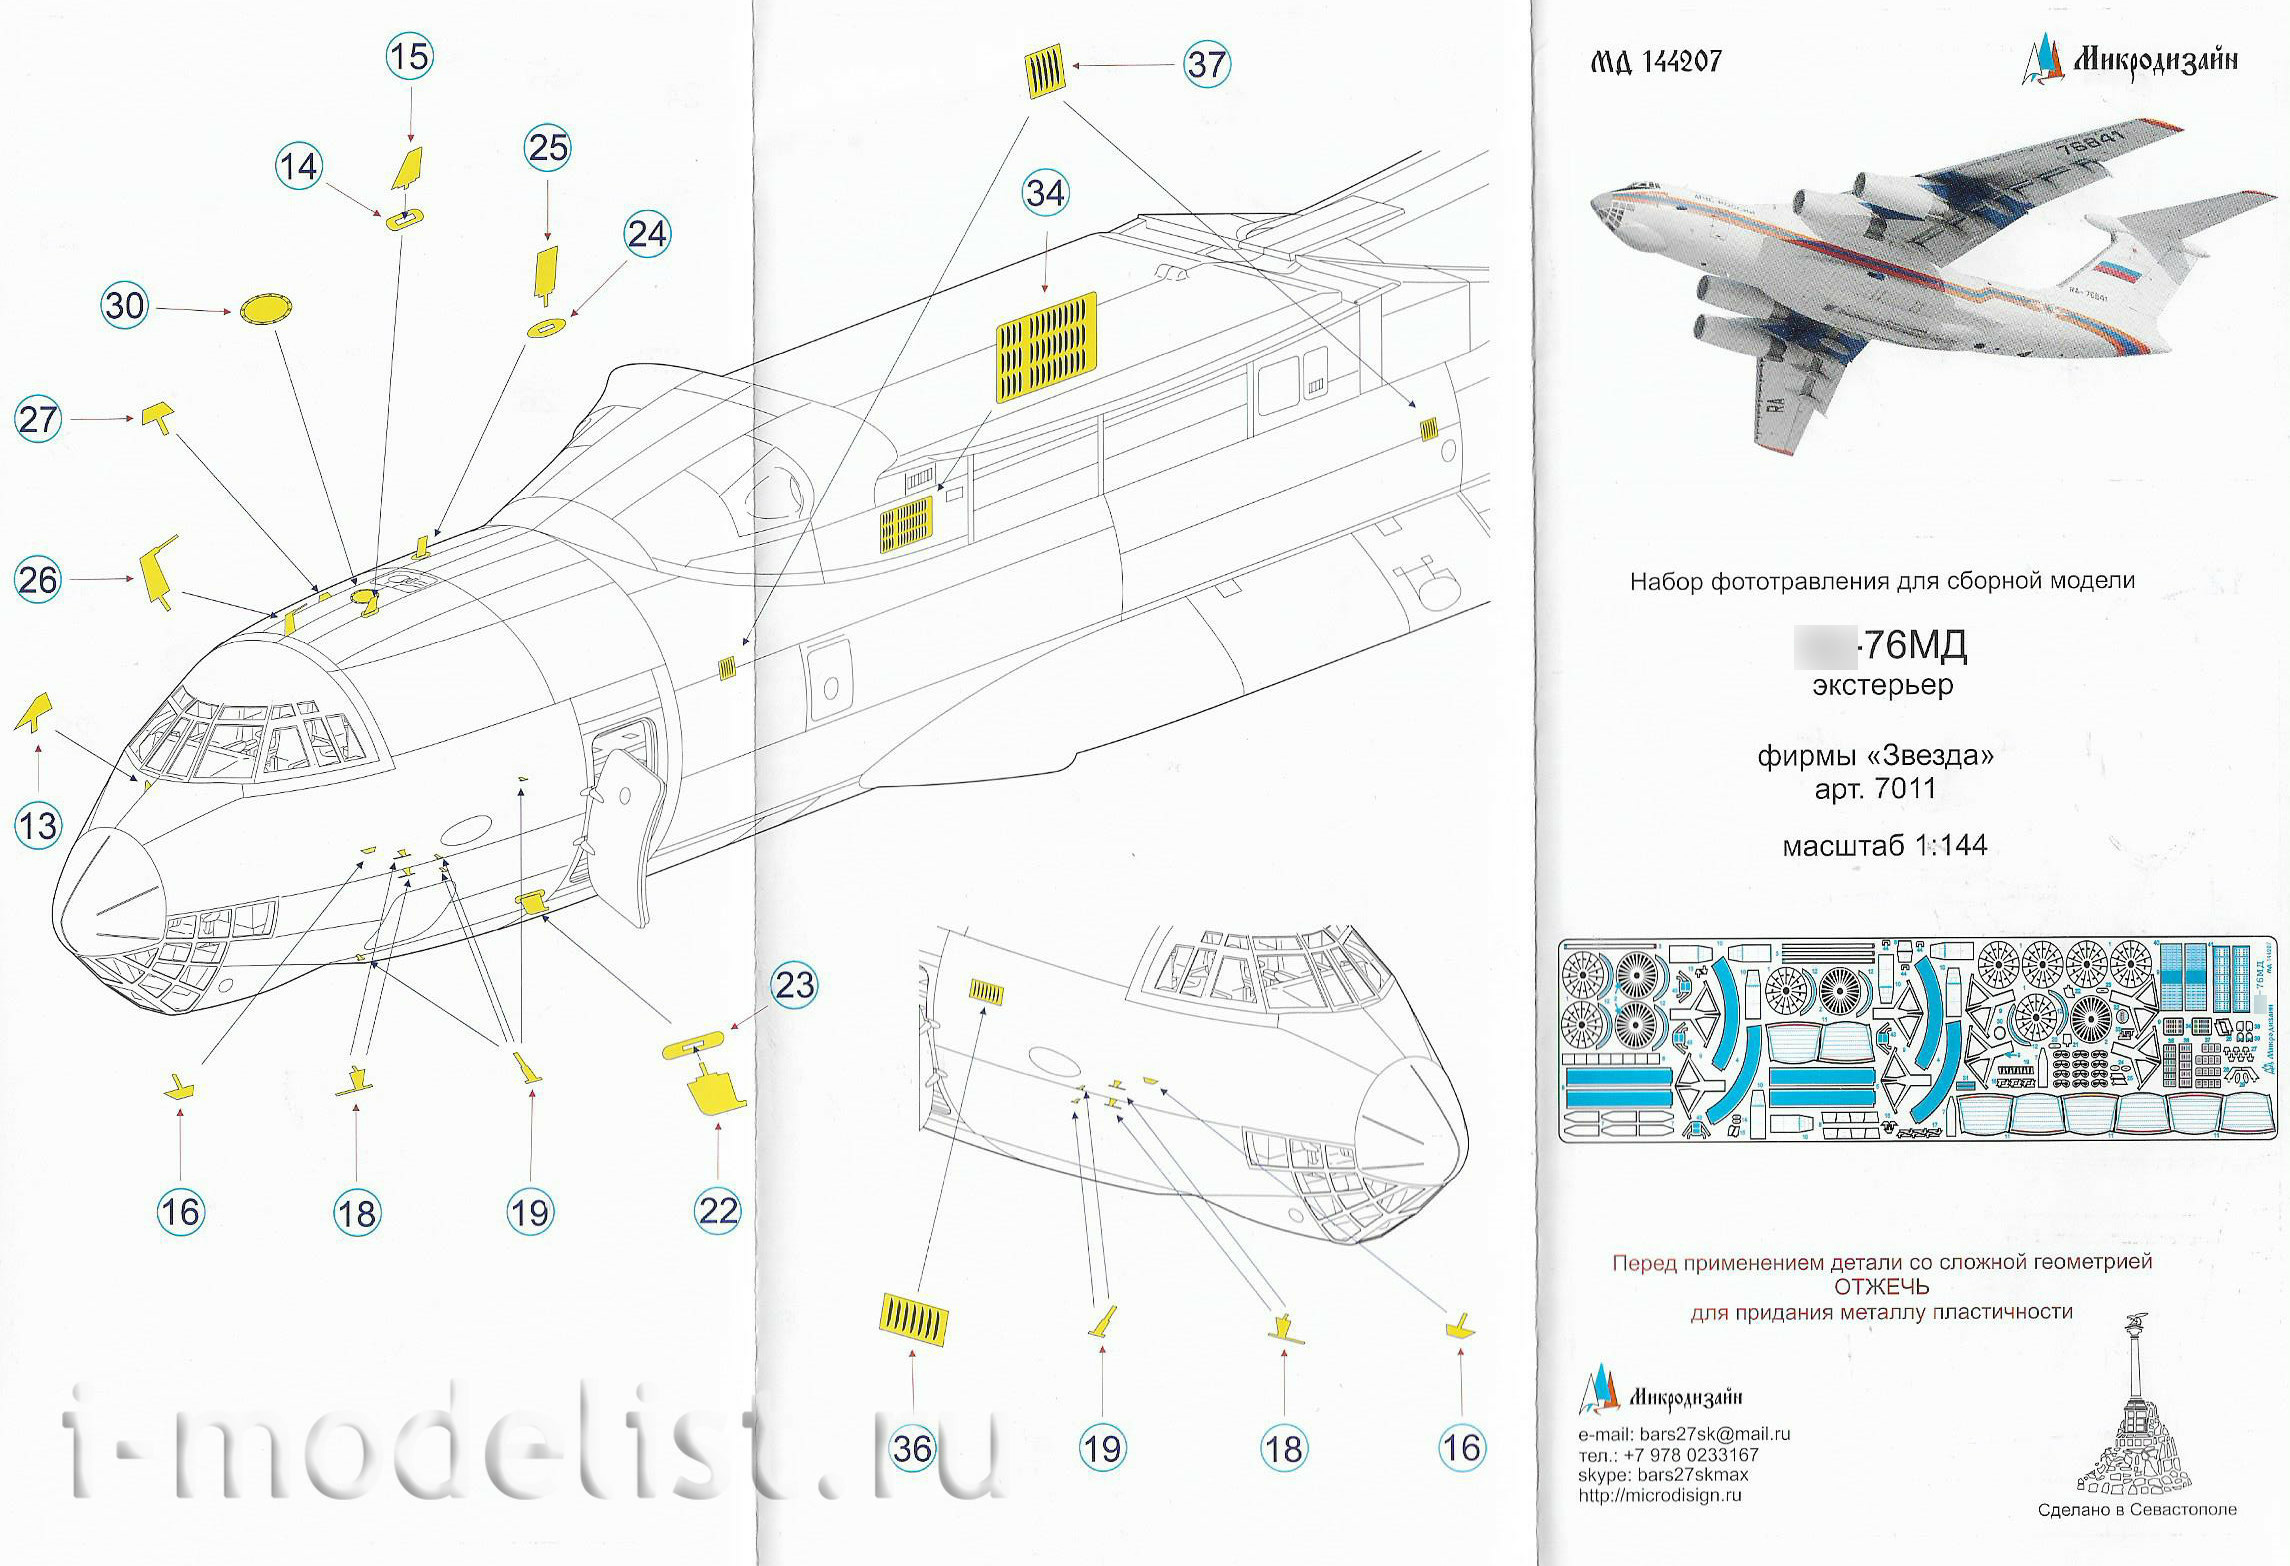 144207 Microdesign 1/144 Scales the Exterior of the Ilyushin-76 from the Zvezda